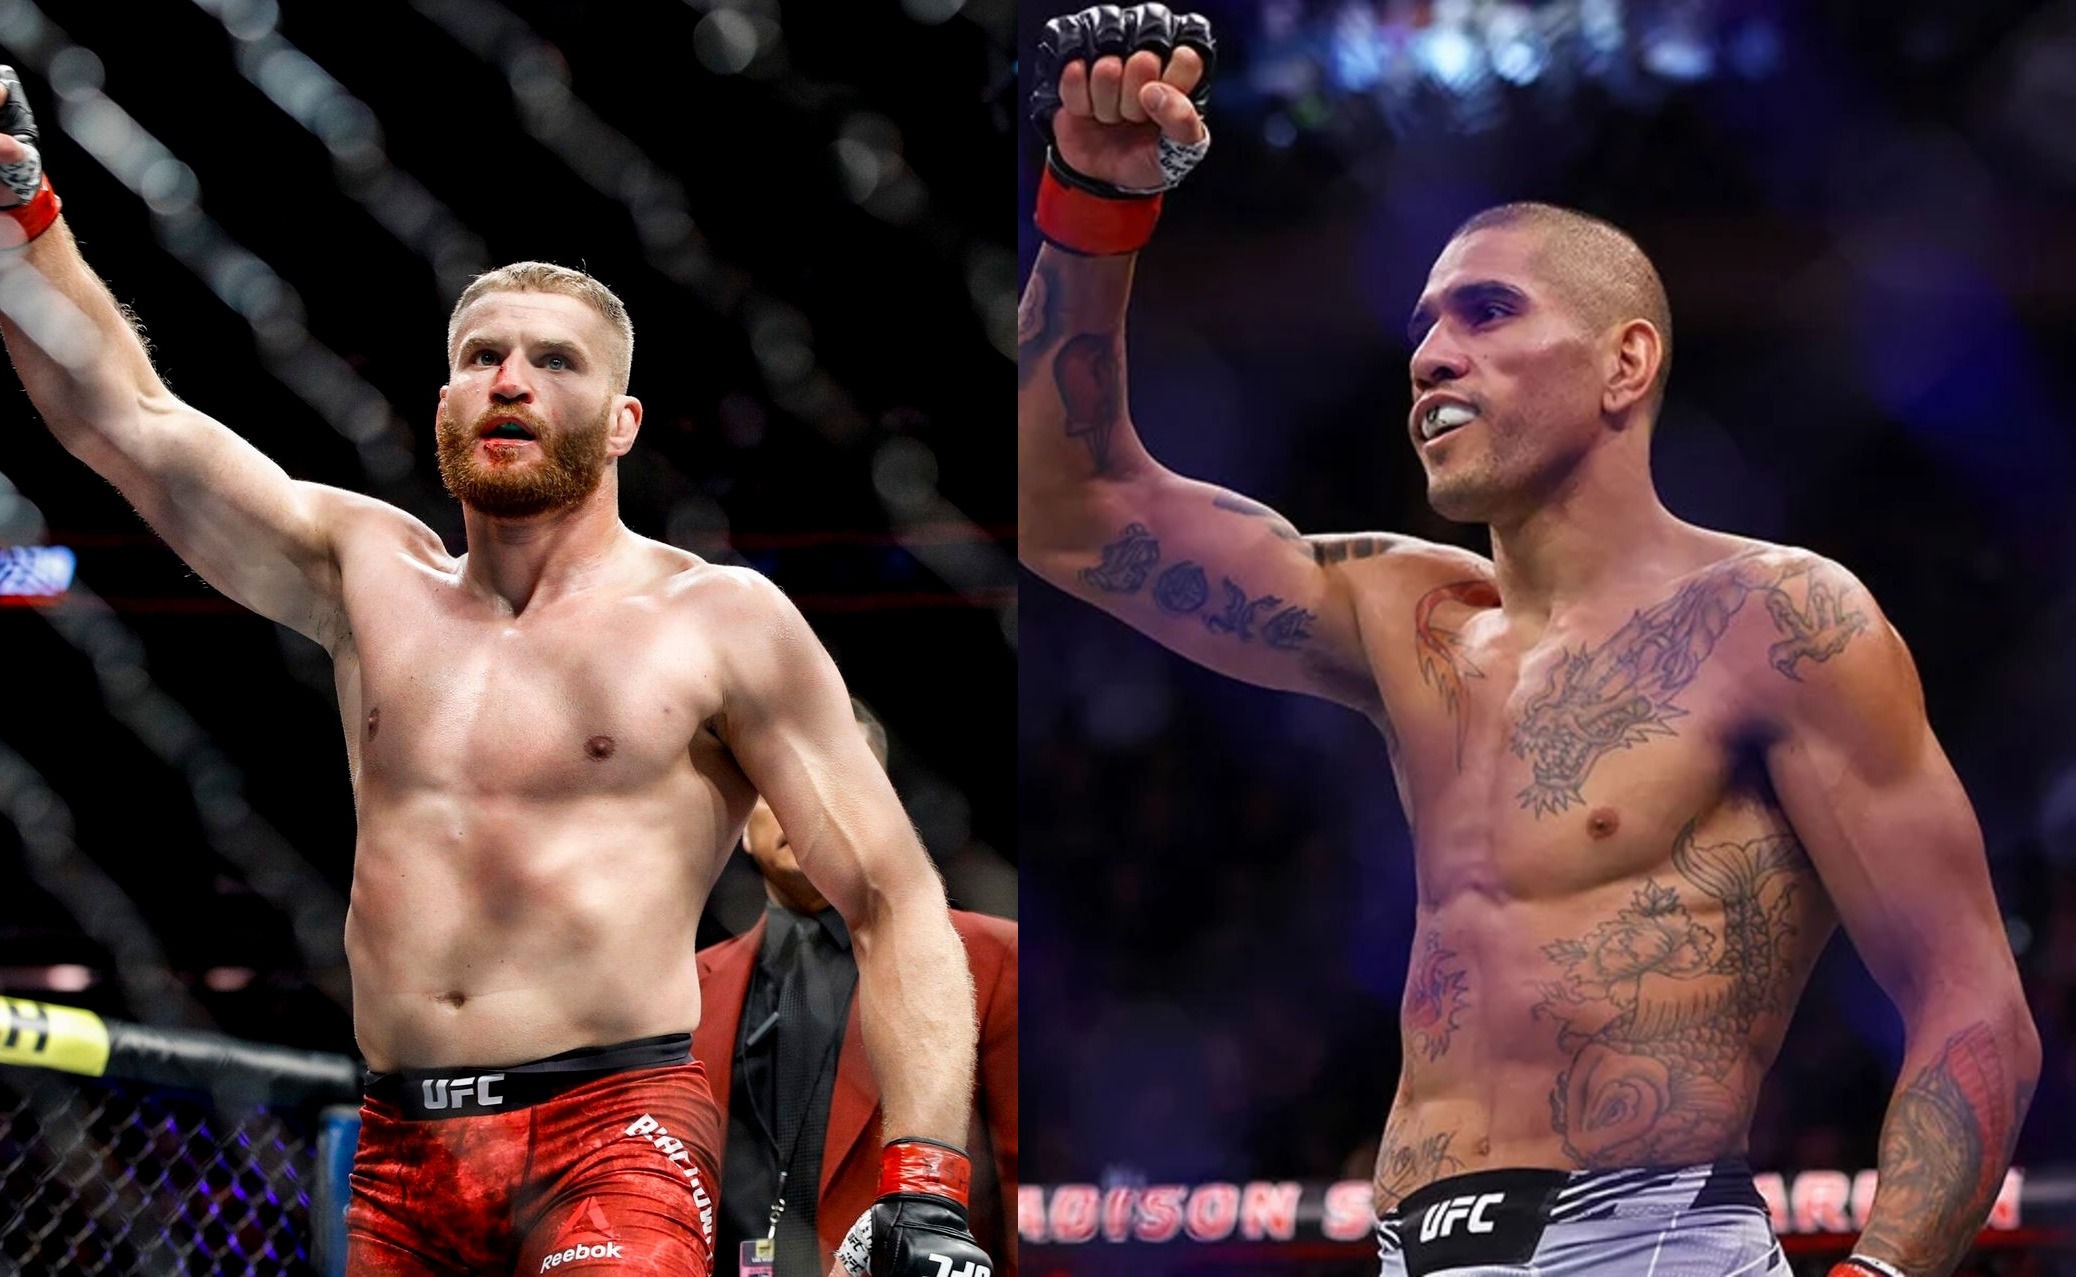 The co-main event is an anticipated Light Heavyweight matchup between Jan Blachowicz vs Alex Pereira.